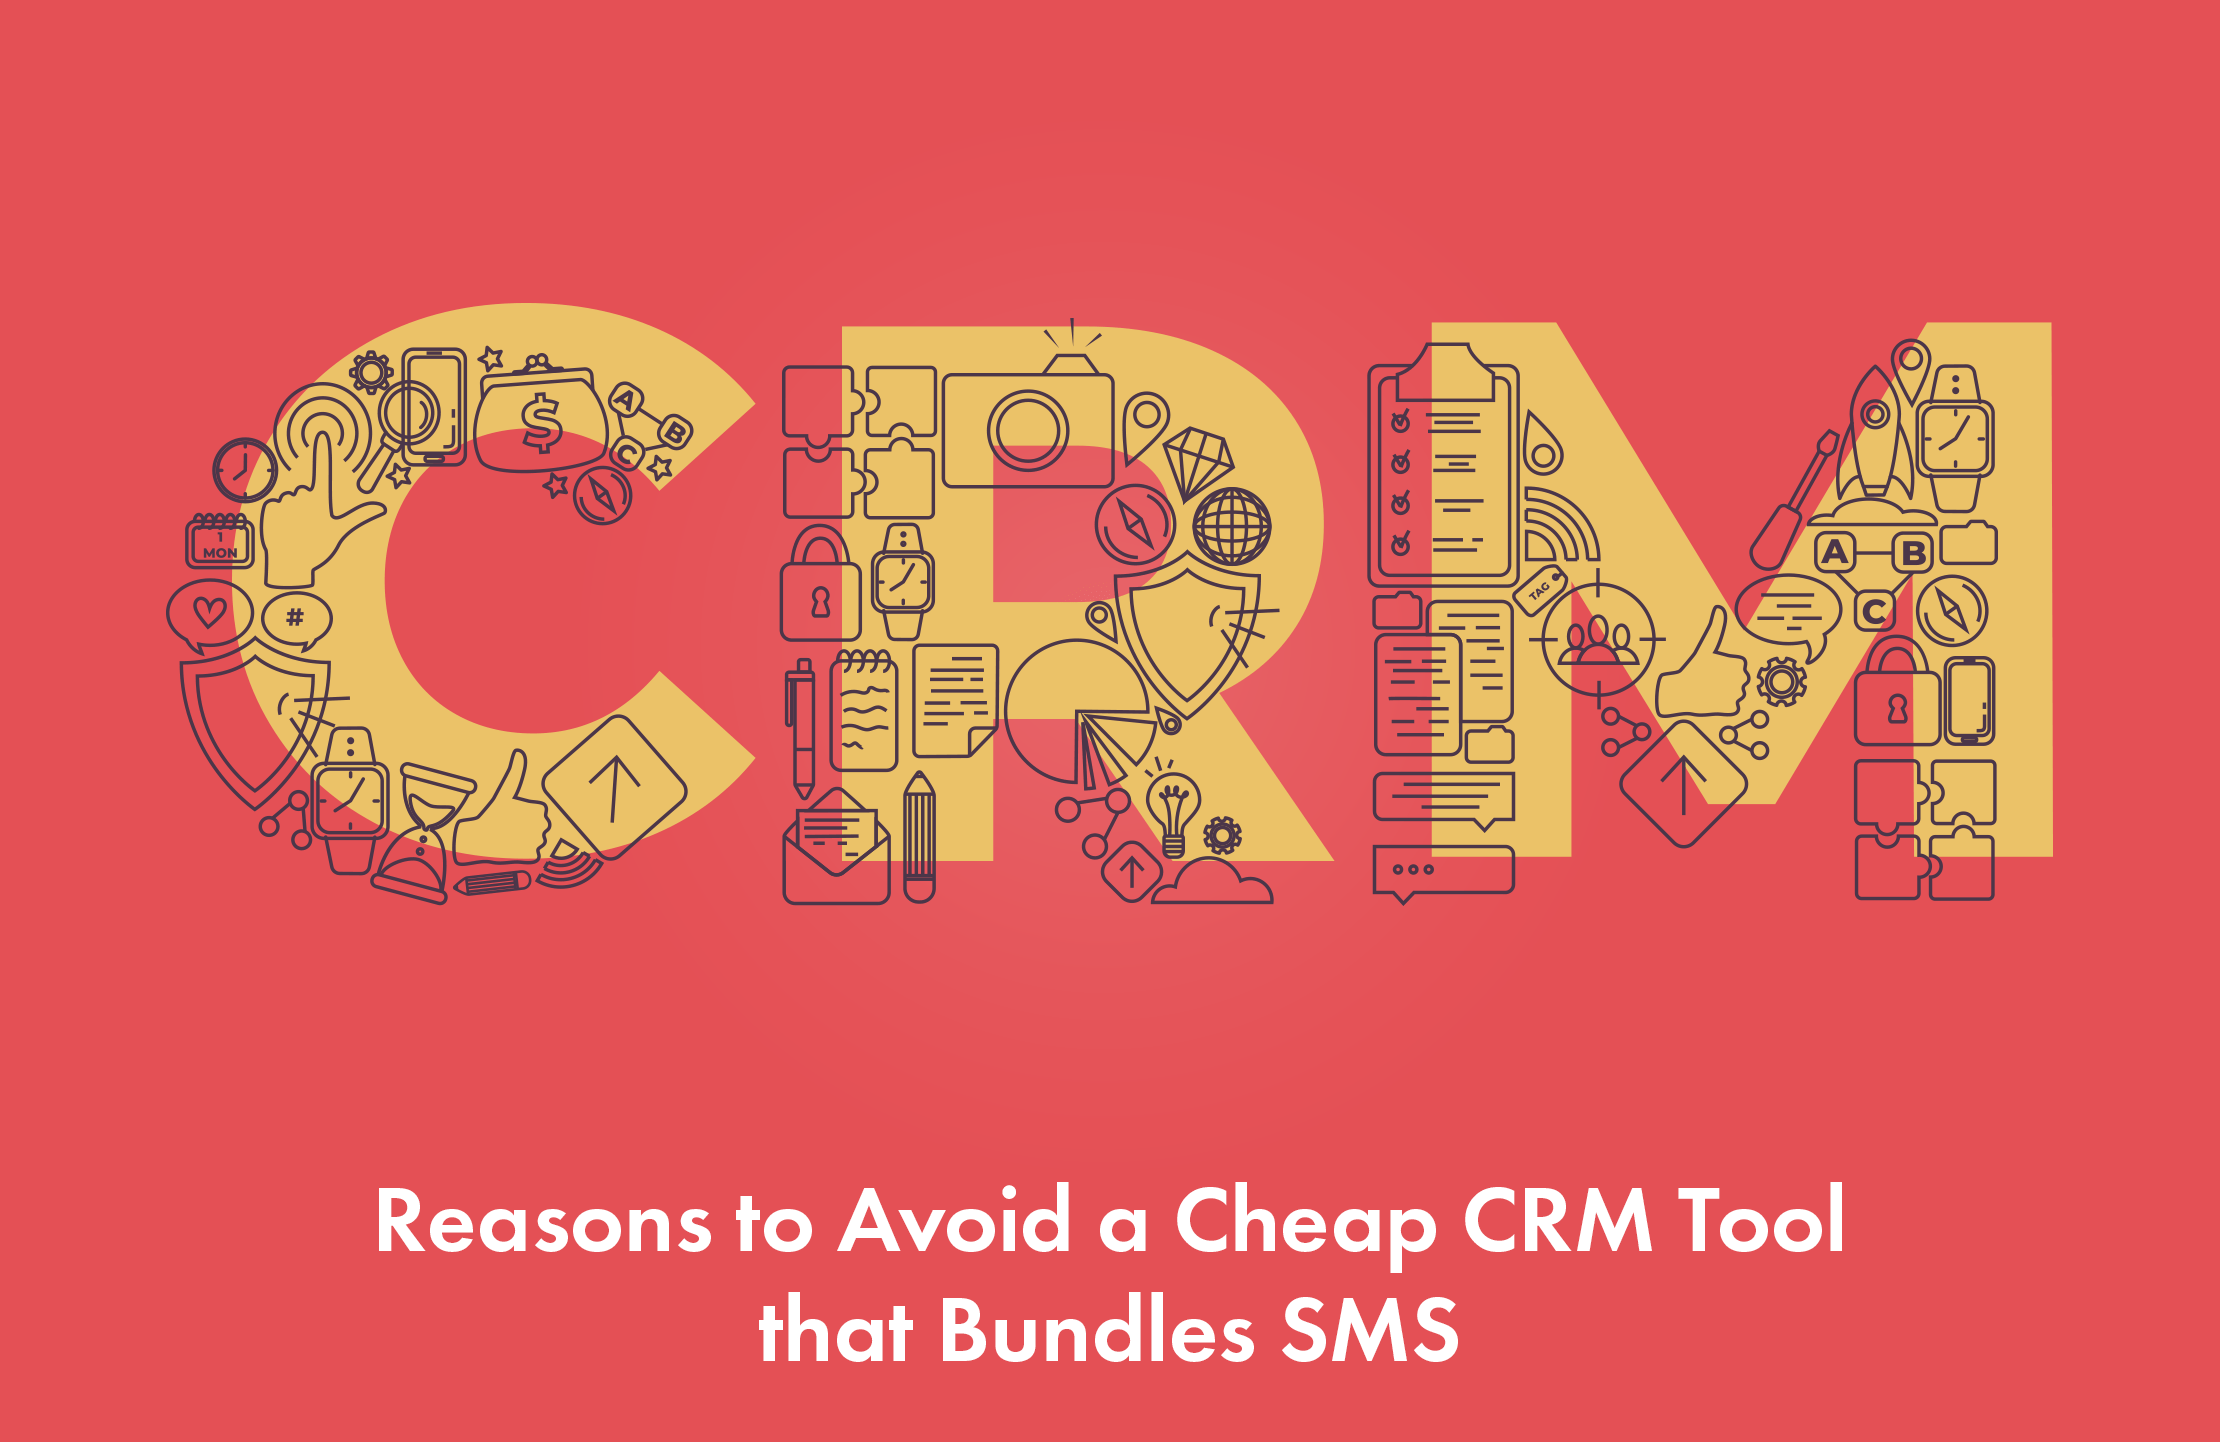 Reasons to Avoid a Cheap CRM Tool That Bundles SMS